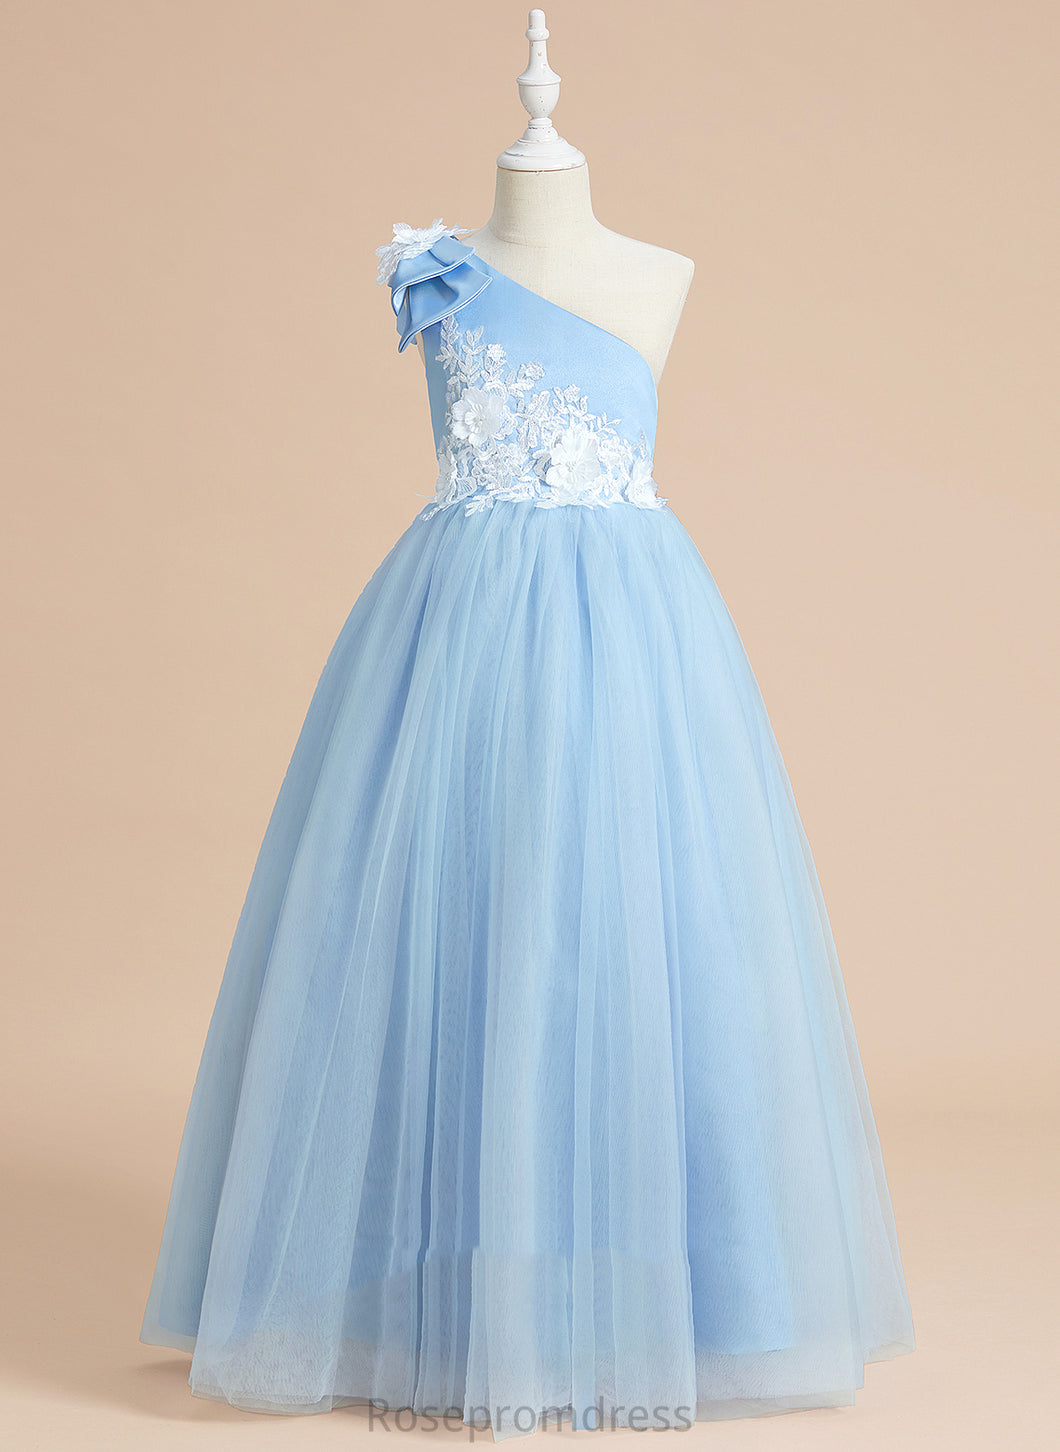 Dress Ball-Gown/Princess - Flower Girl Dresses Sleeveless Flower Girl Satin/Tulle One-Shoulder Thirza With Lace/Bow(s) Floor-length